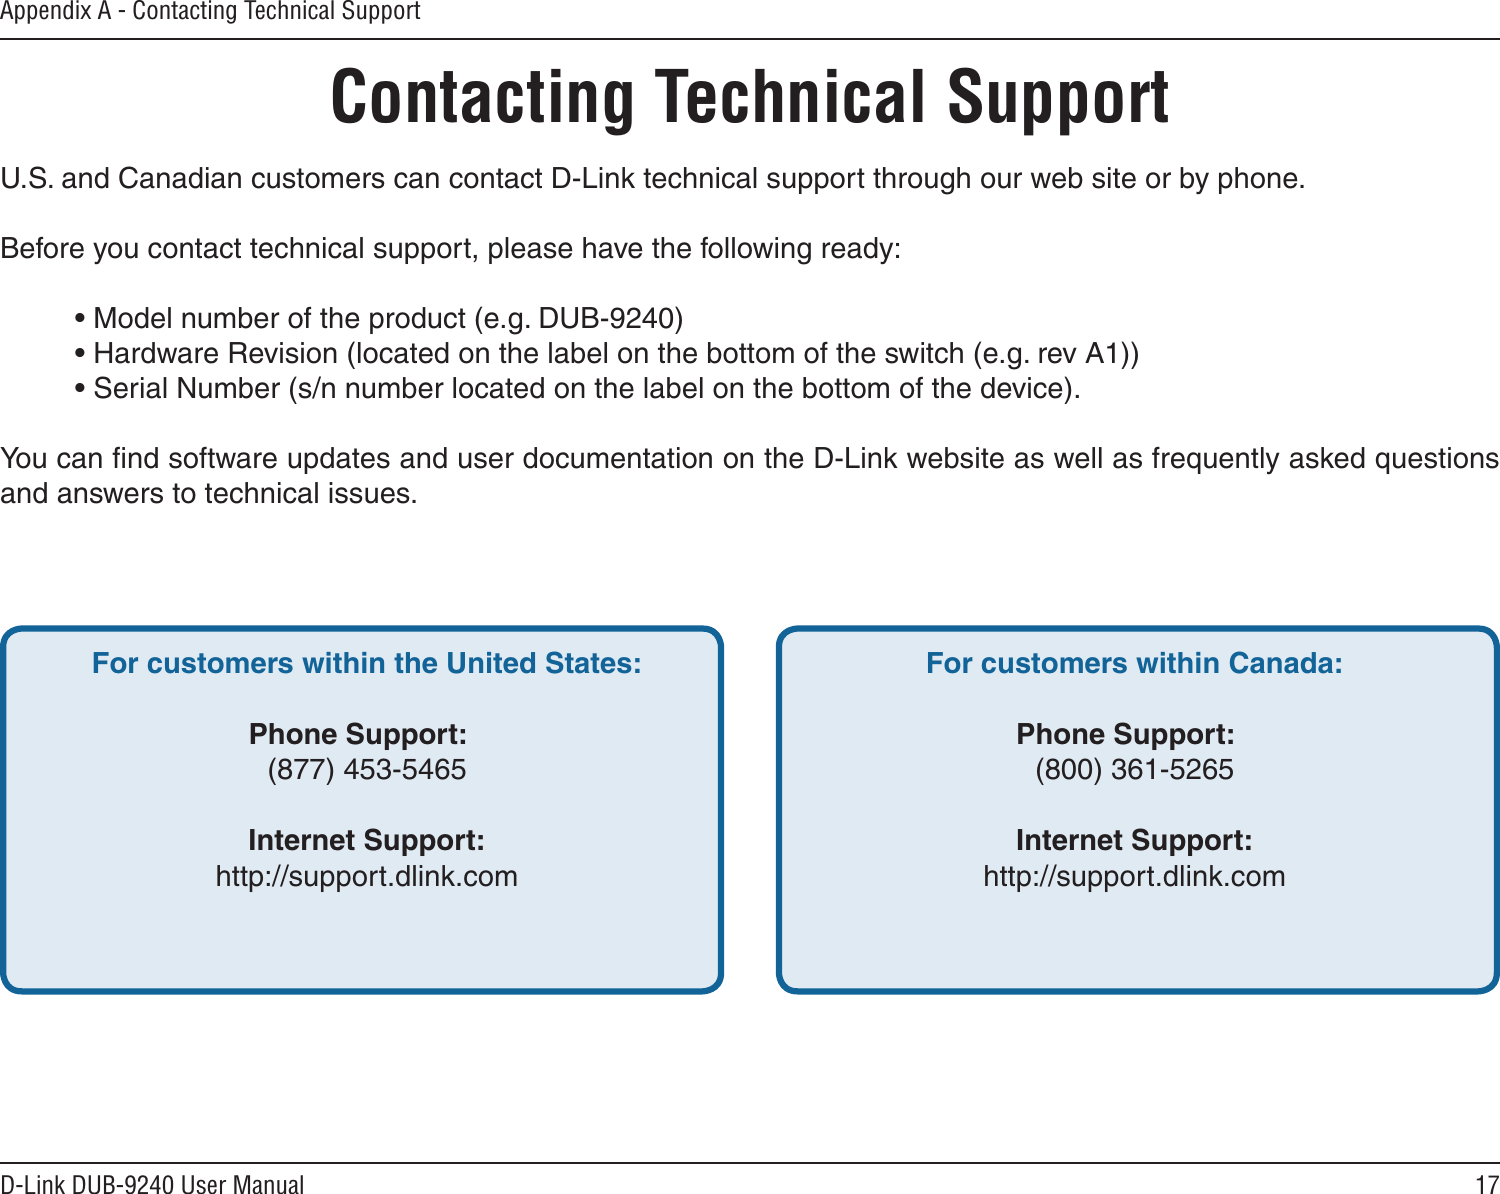 17D-Link DUB-9240 User ManualAppendix A - Contacting Technical SupportContacting Technical SupportU.S. and Canadian customers can contact D-Link technical support through our web site or by phone.Before you contact technical support, please have the following ready:  • Model number of the product (e.g. DUB-9240)  • Hardware Revision (located on the label on the bottom of the switch (e.g. rev A1))  • Serial Number (s/n number located on the label on the bottom of the device). You can ﬁnd software updates and user documentation on the D-Link website as well as frequently asked questions and answers to technical issues.For customers within the United States: Phone Support:  (877) 453-5465 Internet Support:  http://support.dlink.com For customers within Canada: Phone Support:  (800) 361-5265  Internet Support:  http://support.dlink.com 